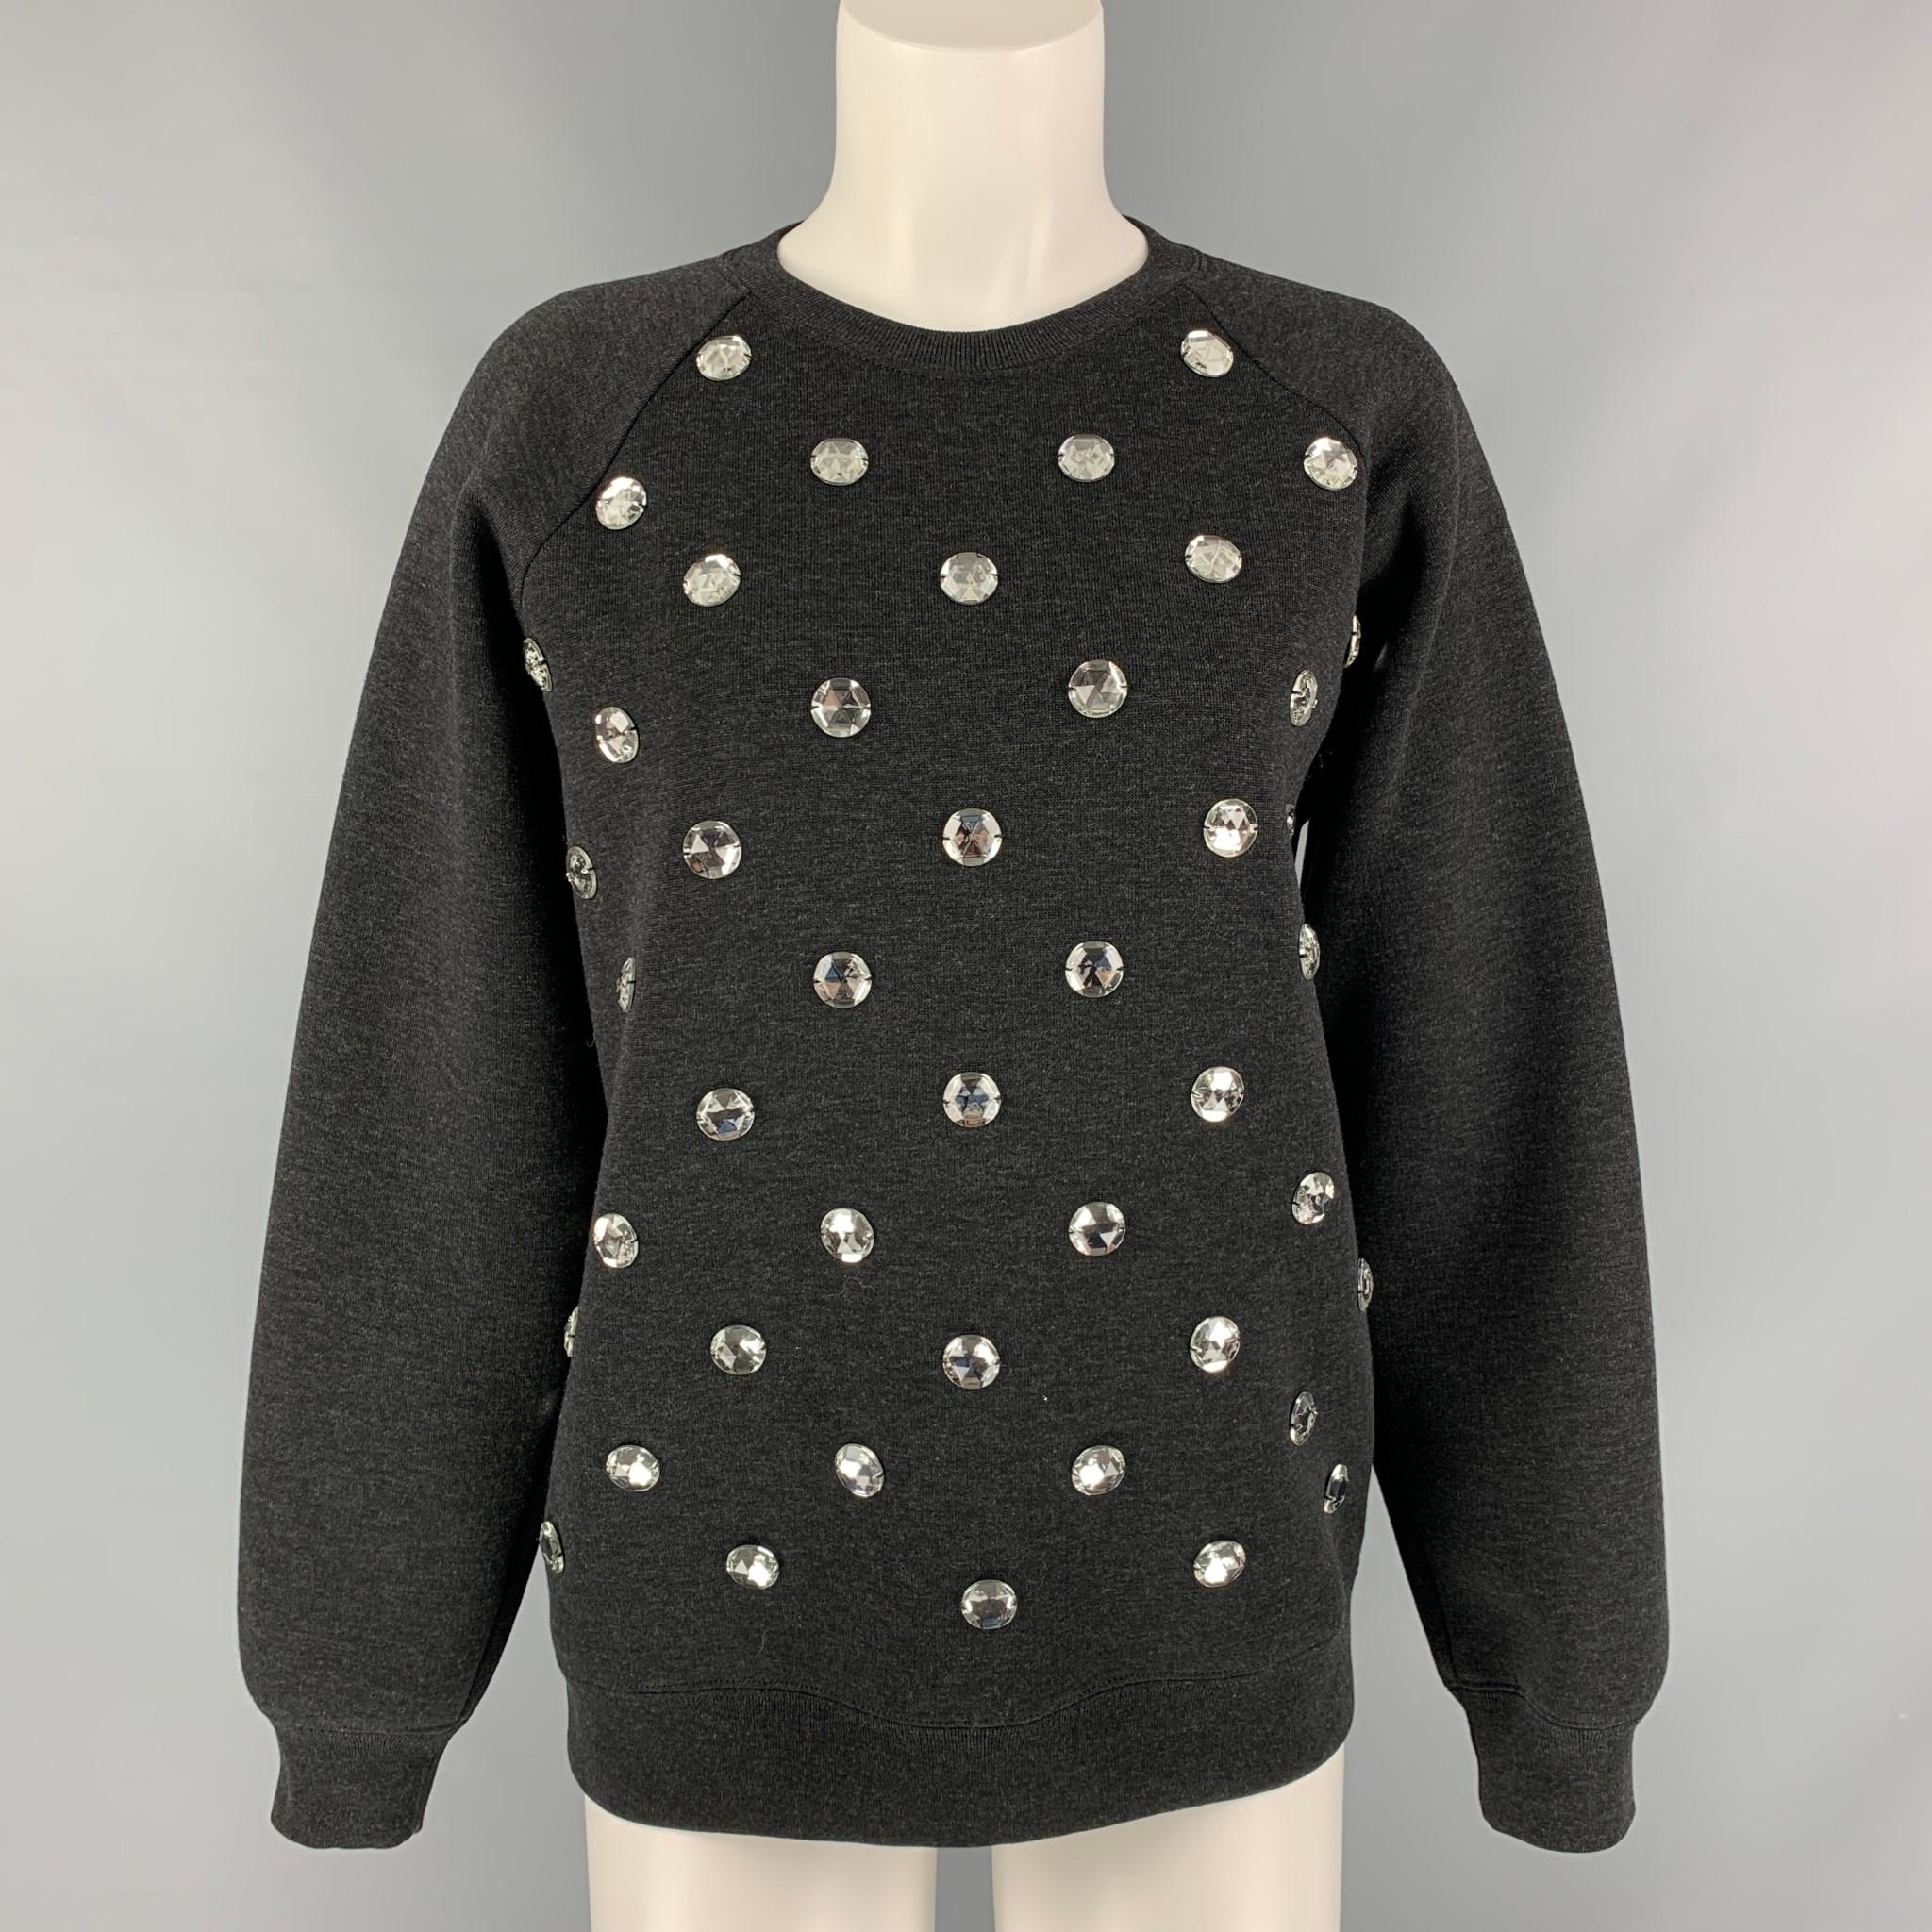 MARC JACOBS long sleeves pullover comes in a black wool blend heather jersey fabric featuring appliques at front. Made in Italy.

Excellent Pre-Owned Condition.
Marked: XS

Measurements:

Shoulder: 16.5 in.
Bust: 40 in.
Sleeve: 23.5 in.
Length: 25